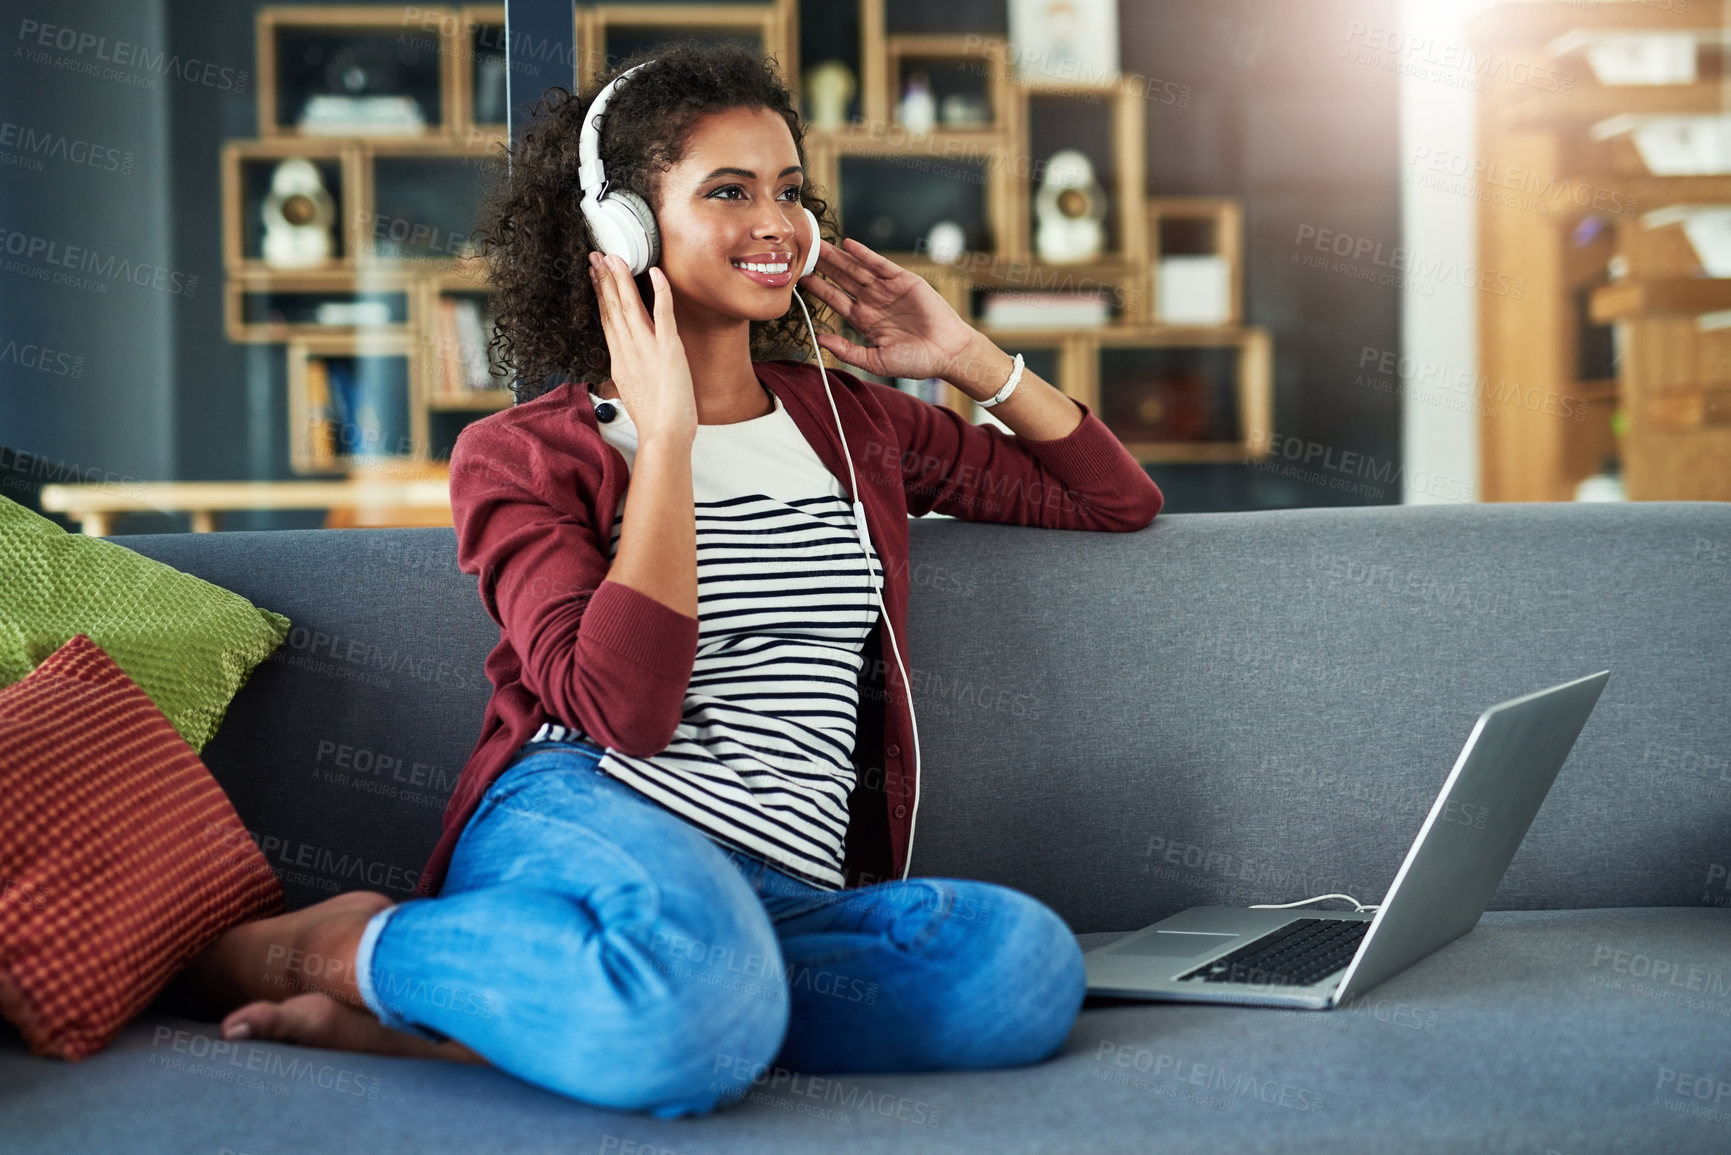 Buy stock photo Shot of a young woman using headphones and a laptop on the sofa at home